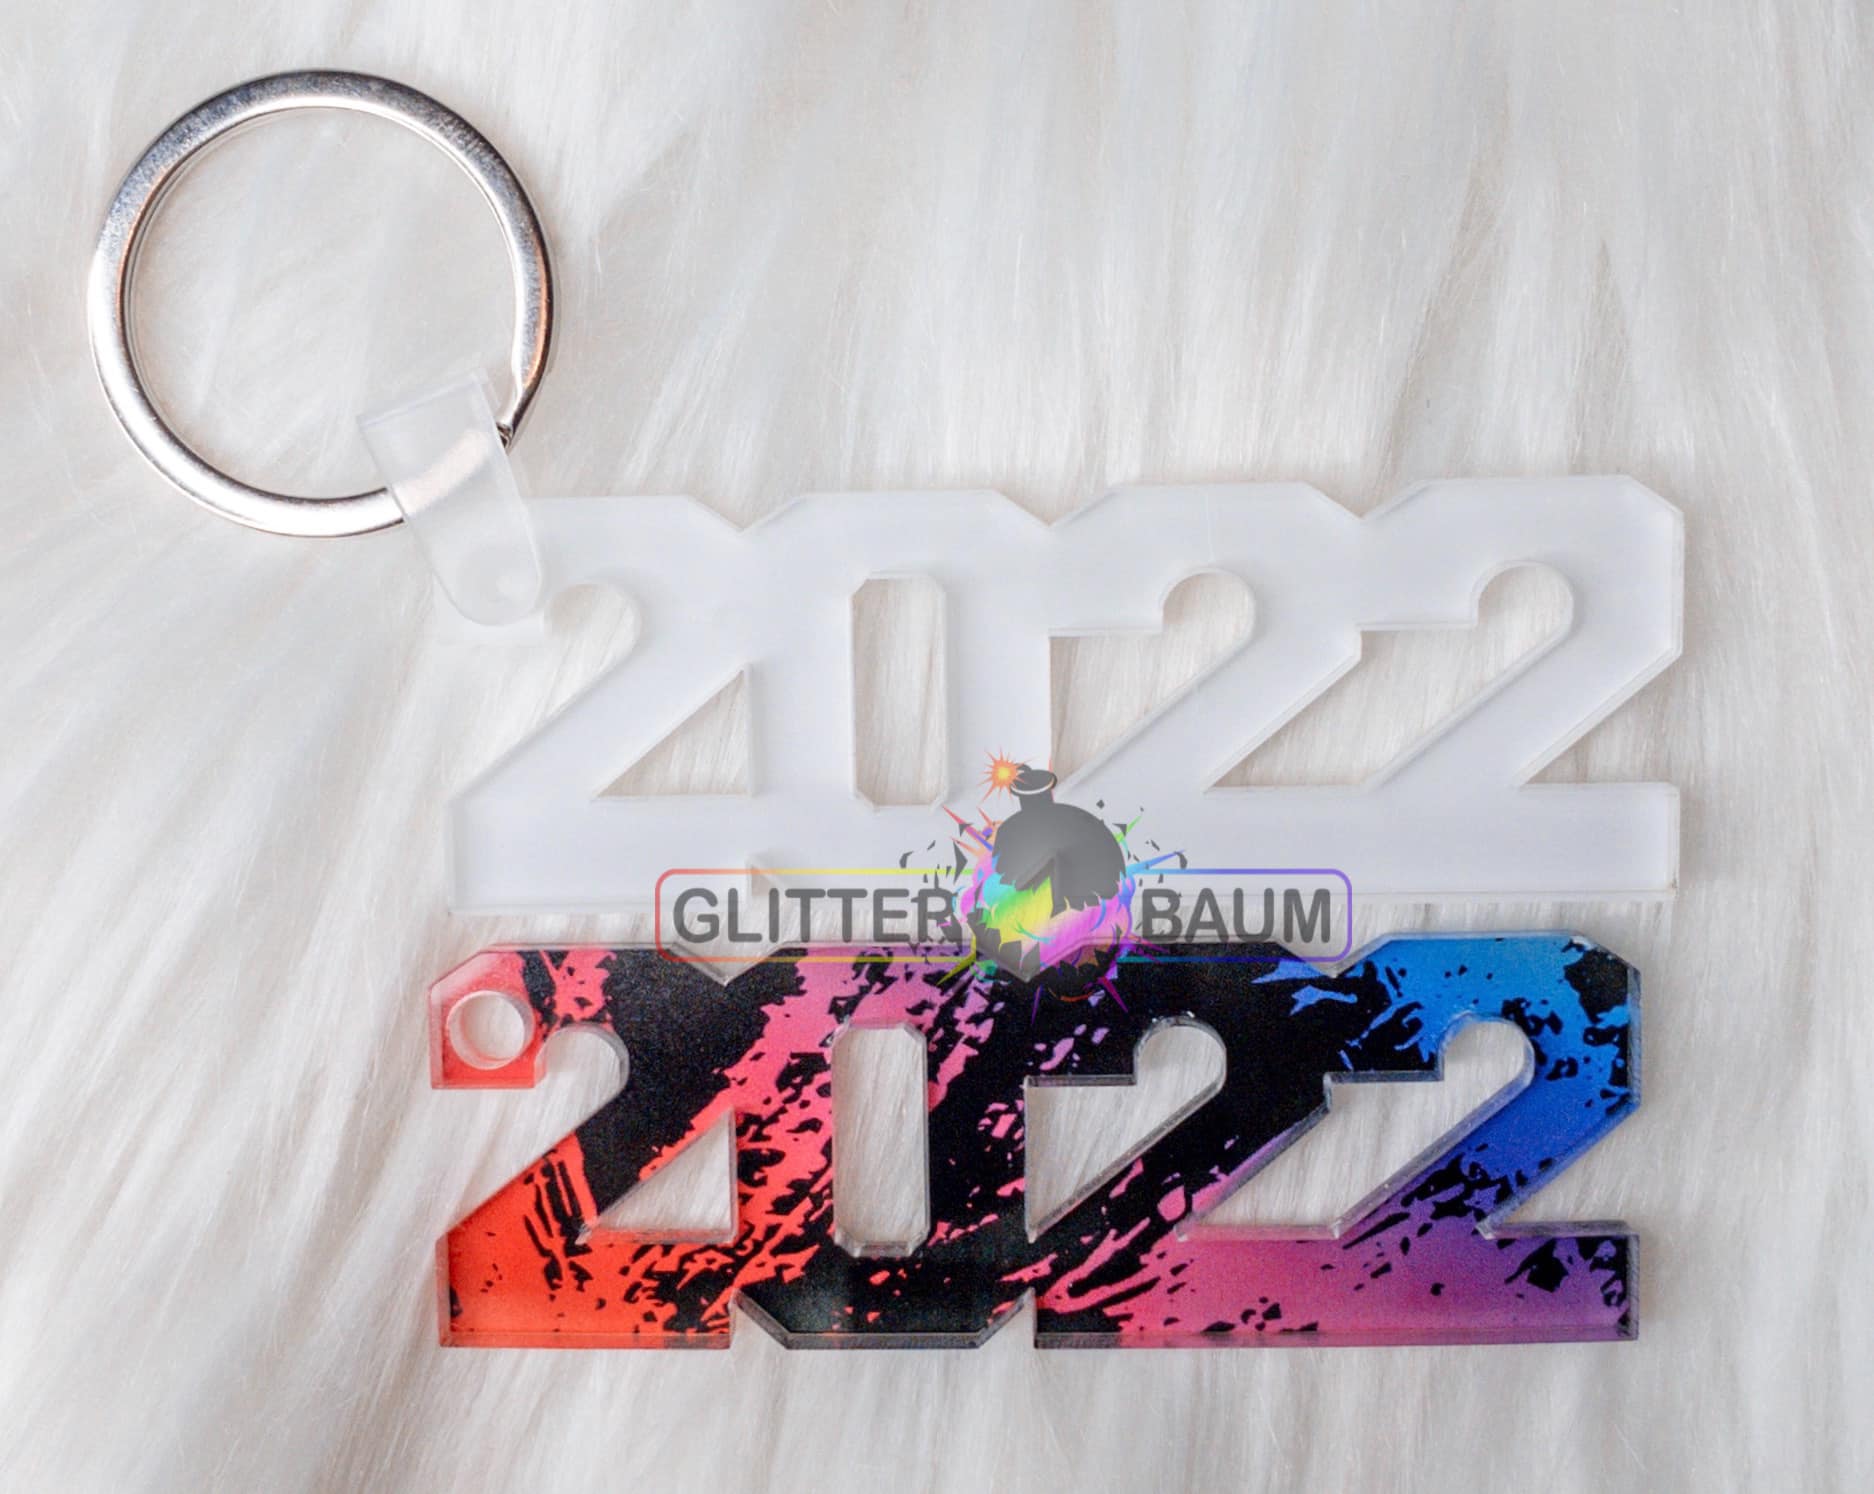 How To Do Sublimation On Acrylic Keychains Or Fabric